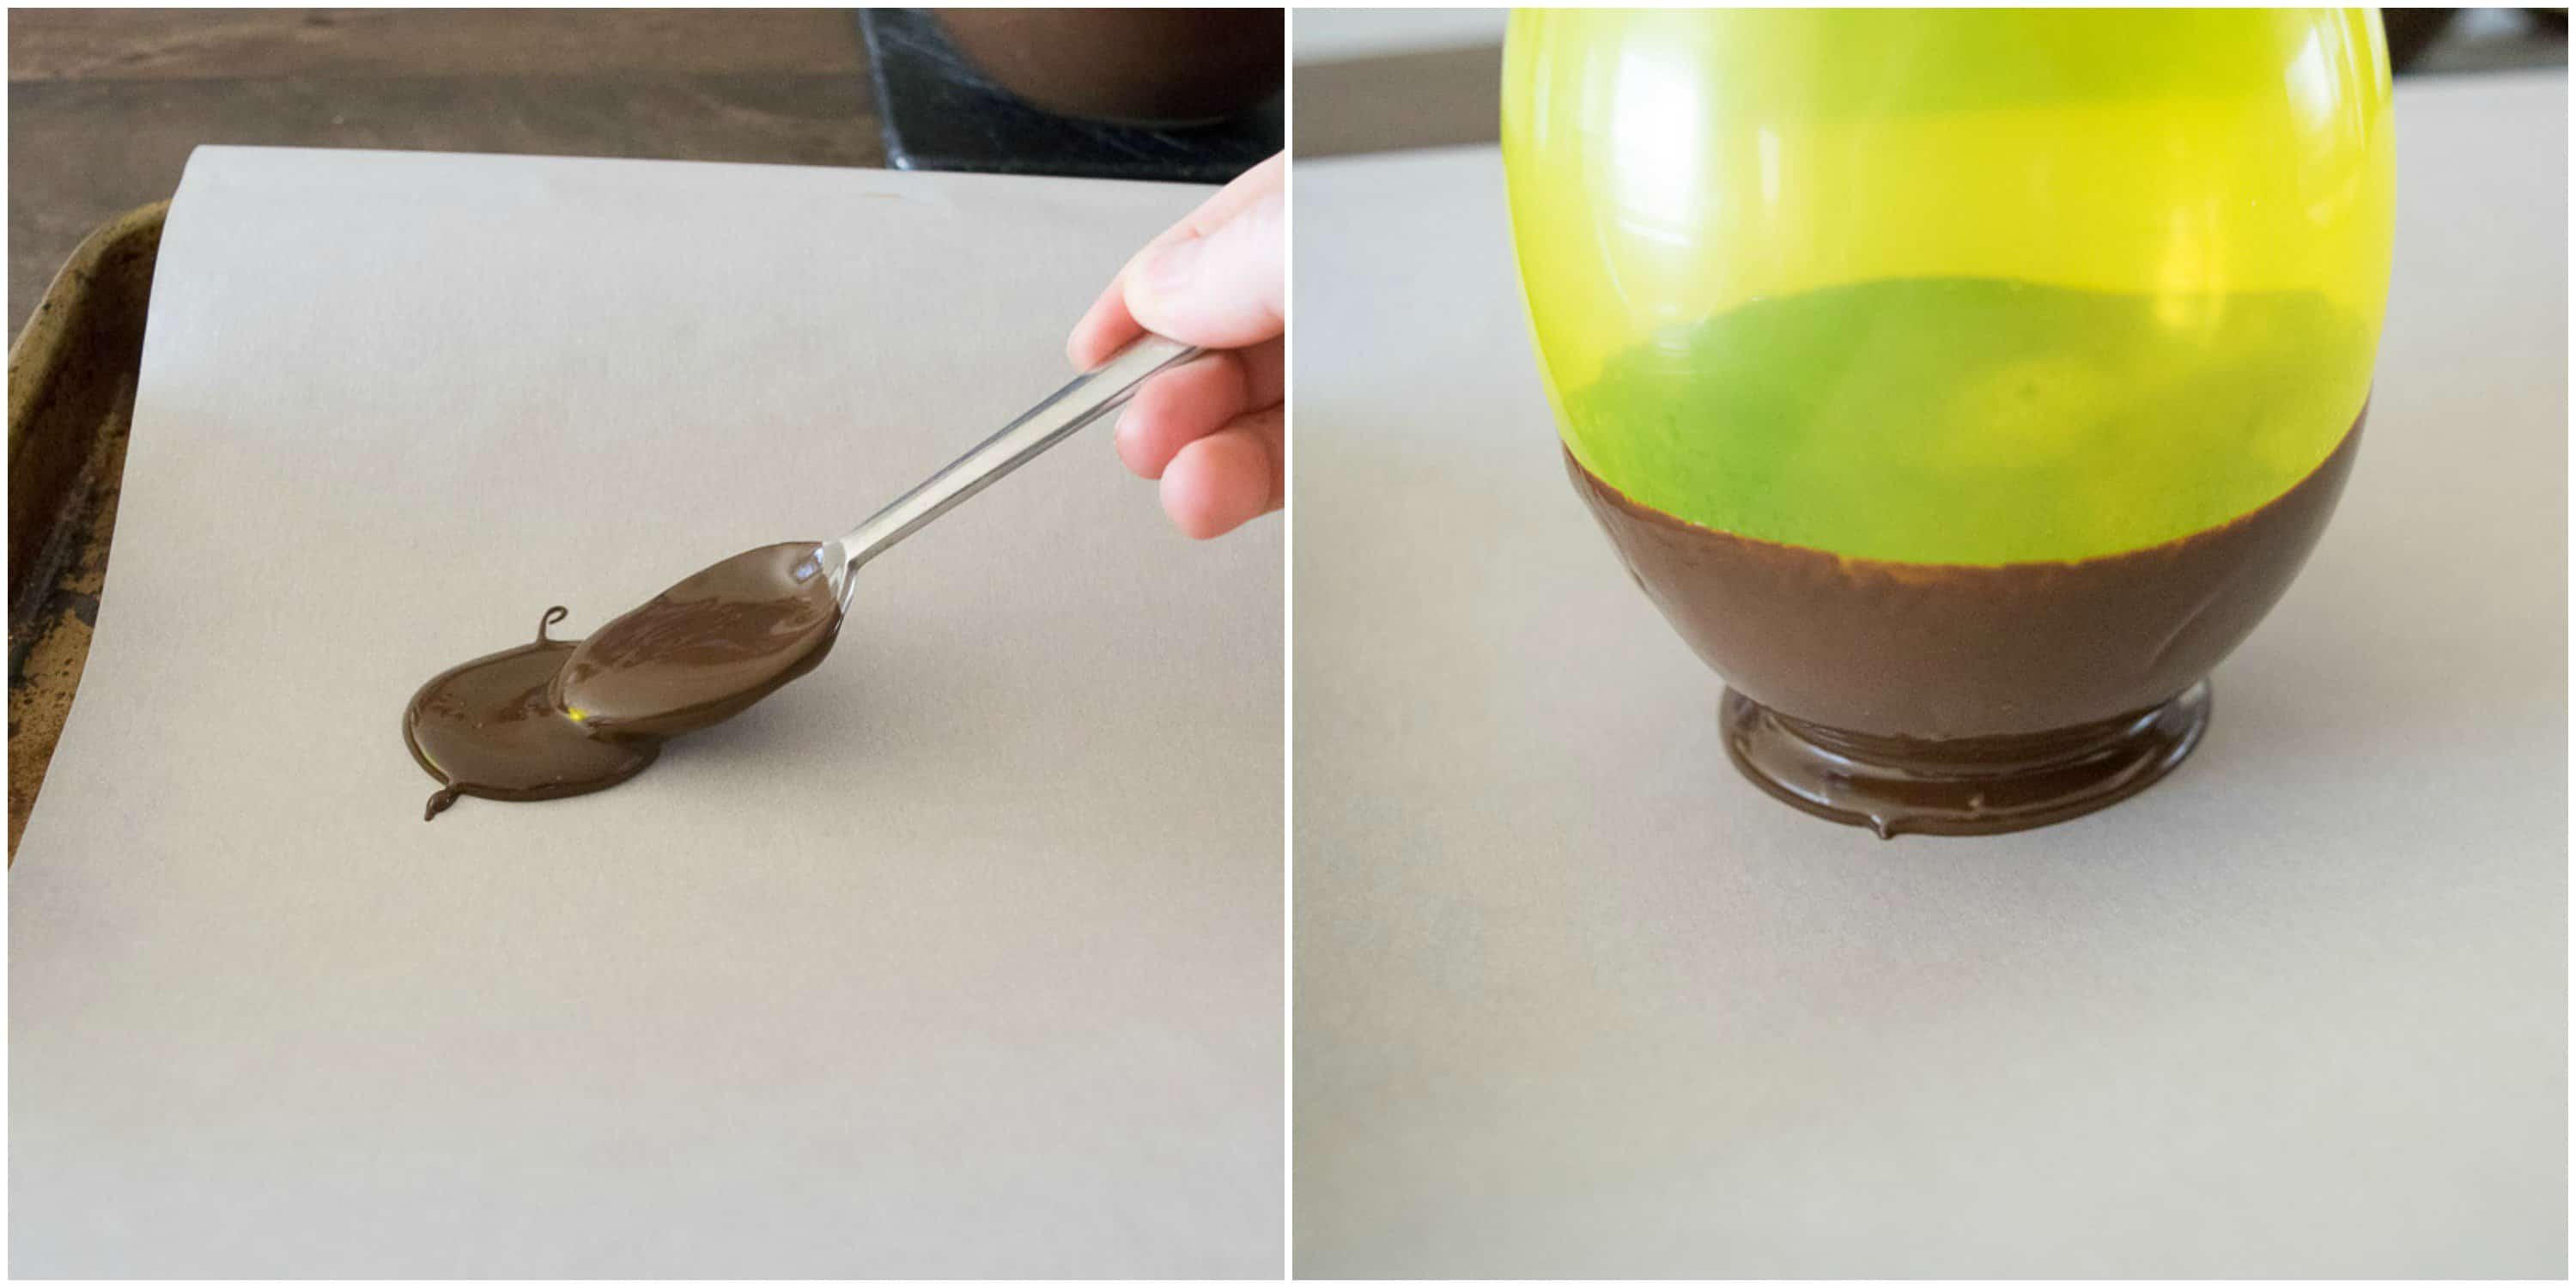 Melted chocolate is placed in parchment paper to act as a stand for the chocolate bowl